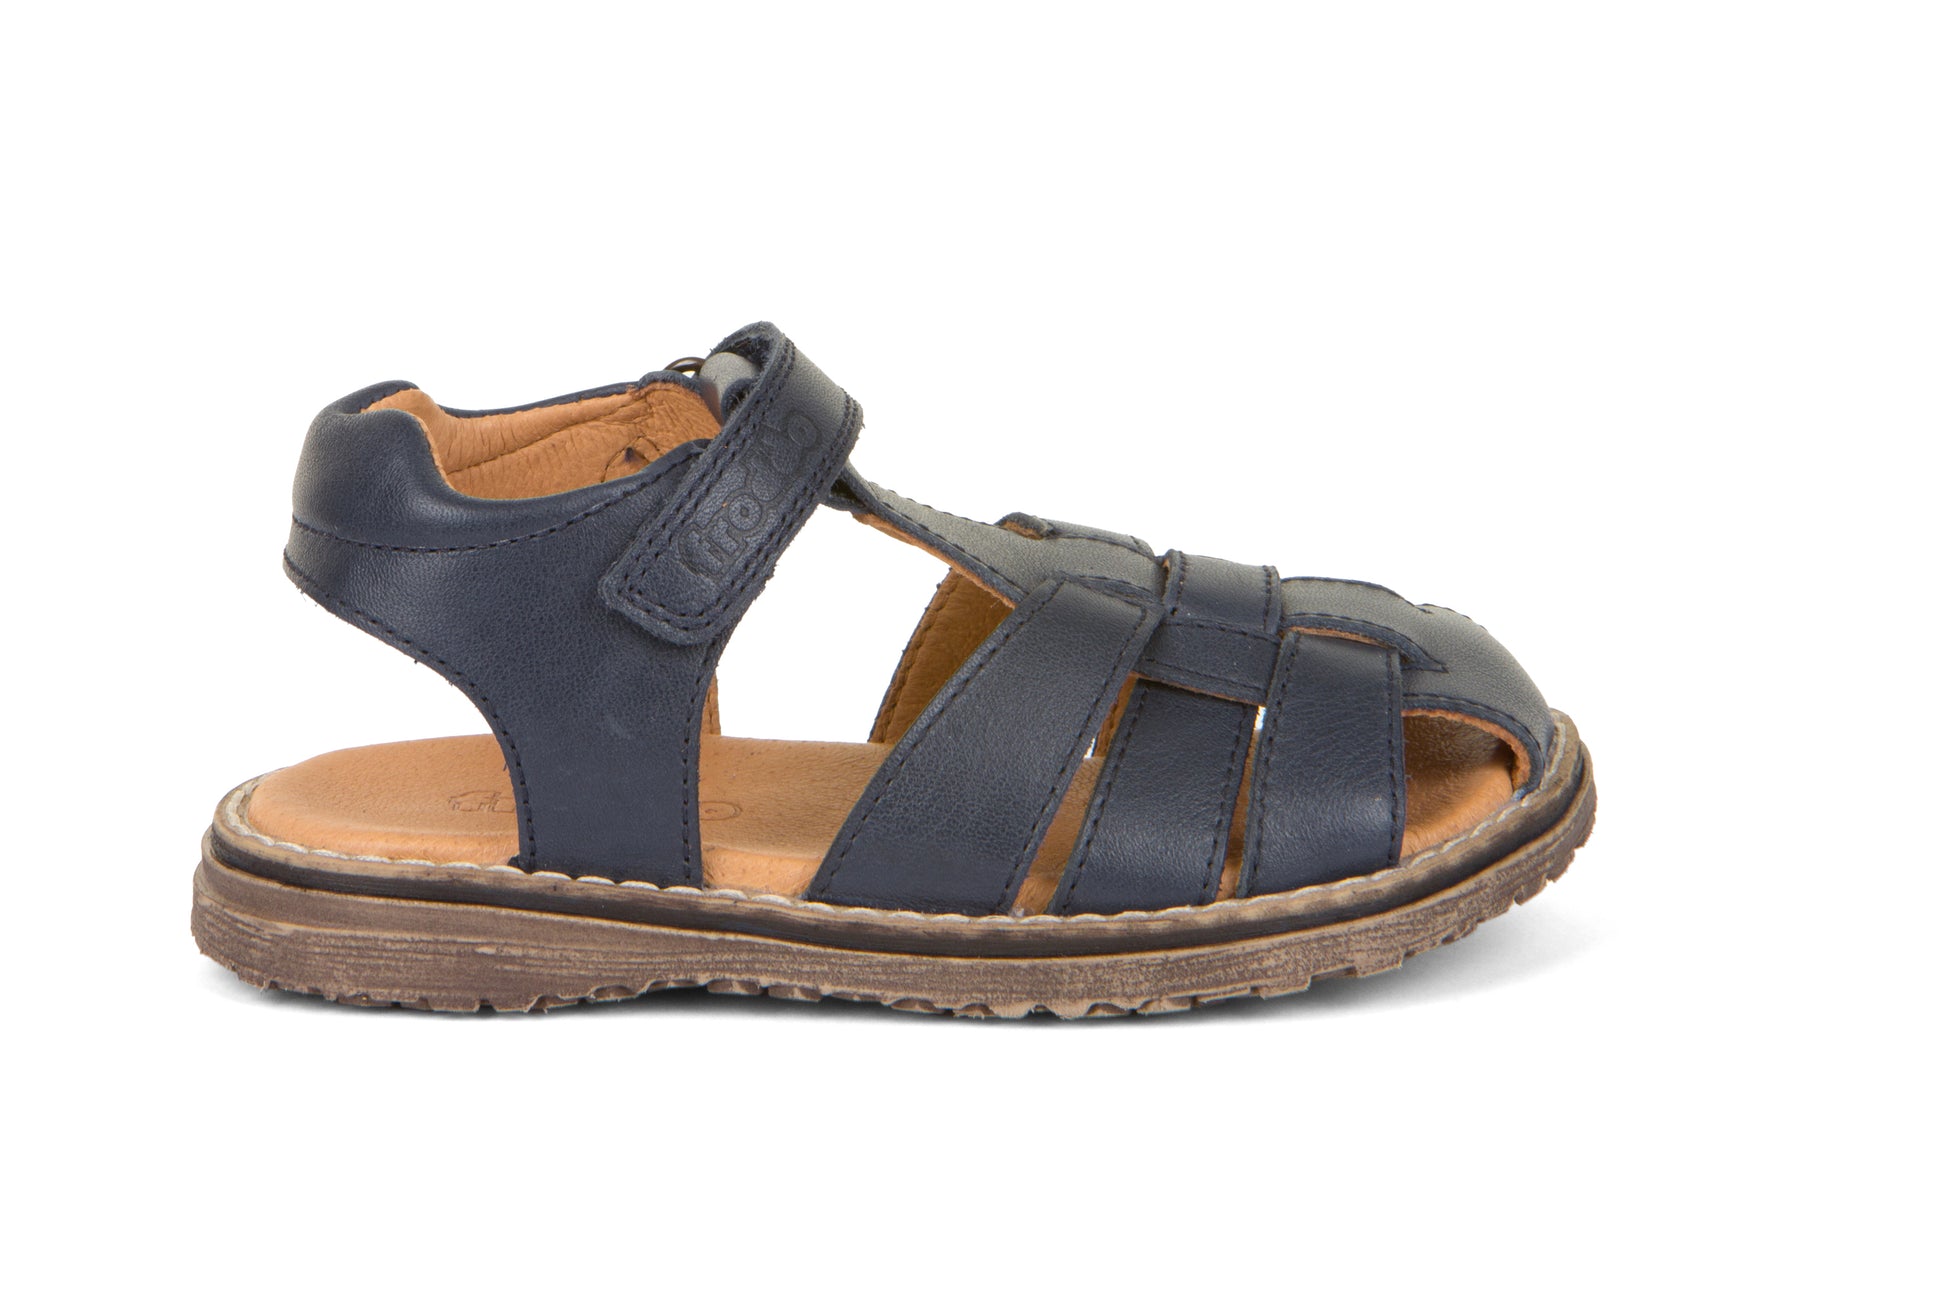 A boys sandal by Froddo, style G31500233 Daros, in navy ,velcro fastening. Right side view.